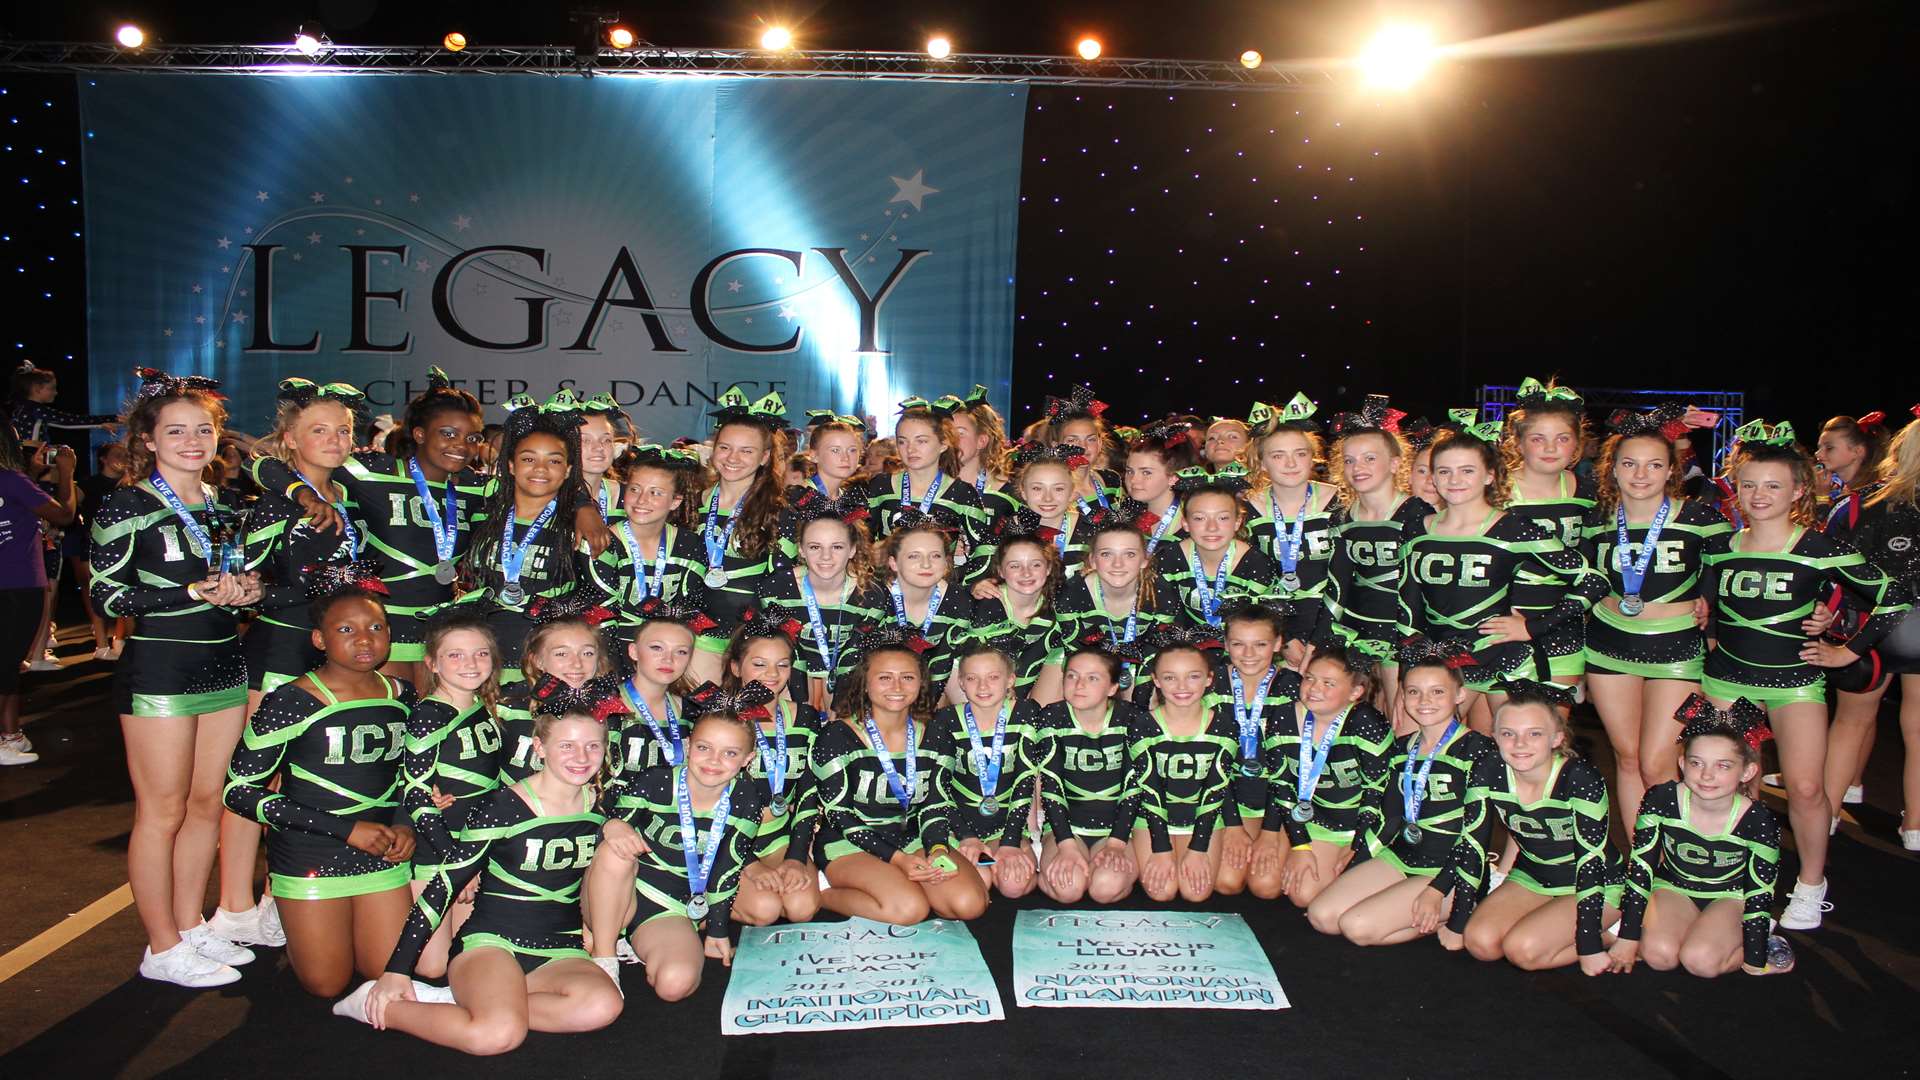 A group shot of teams Fury and Heat, who both took first place in their categories at Legacy Cheer and Dance Nationals